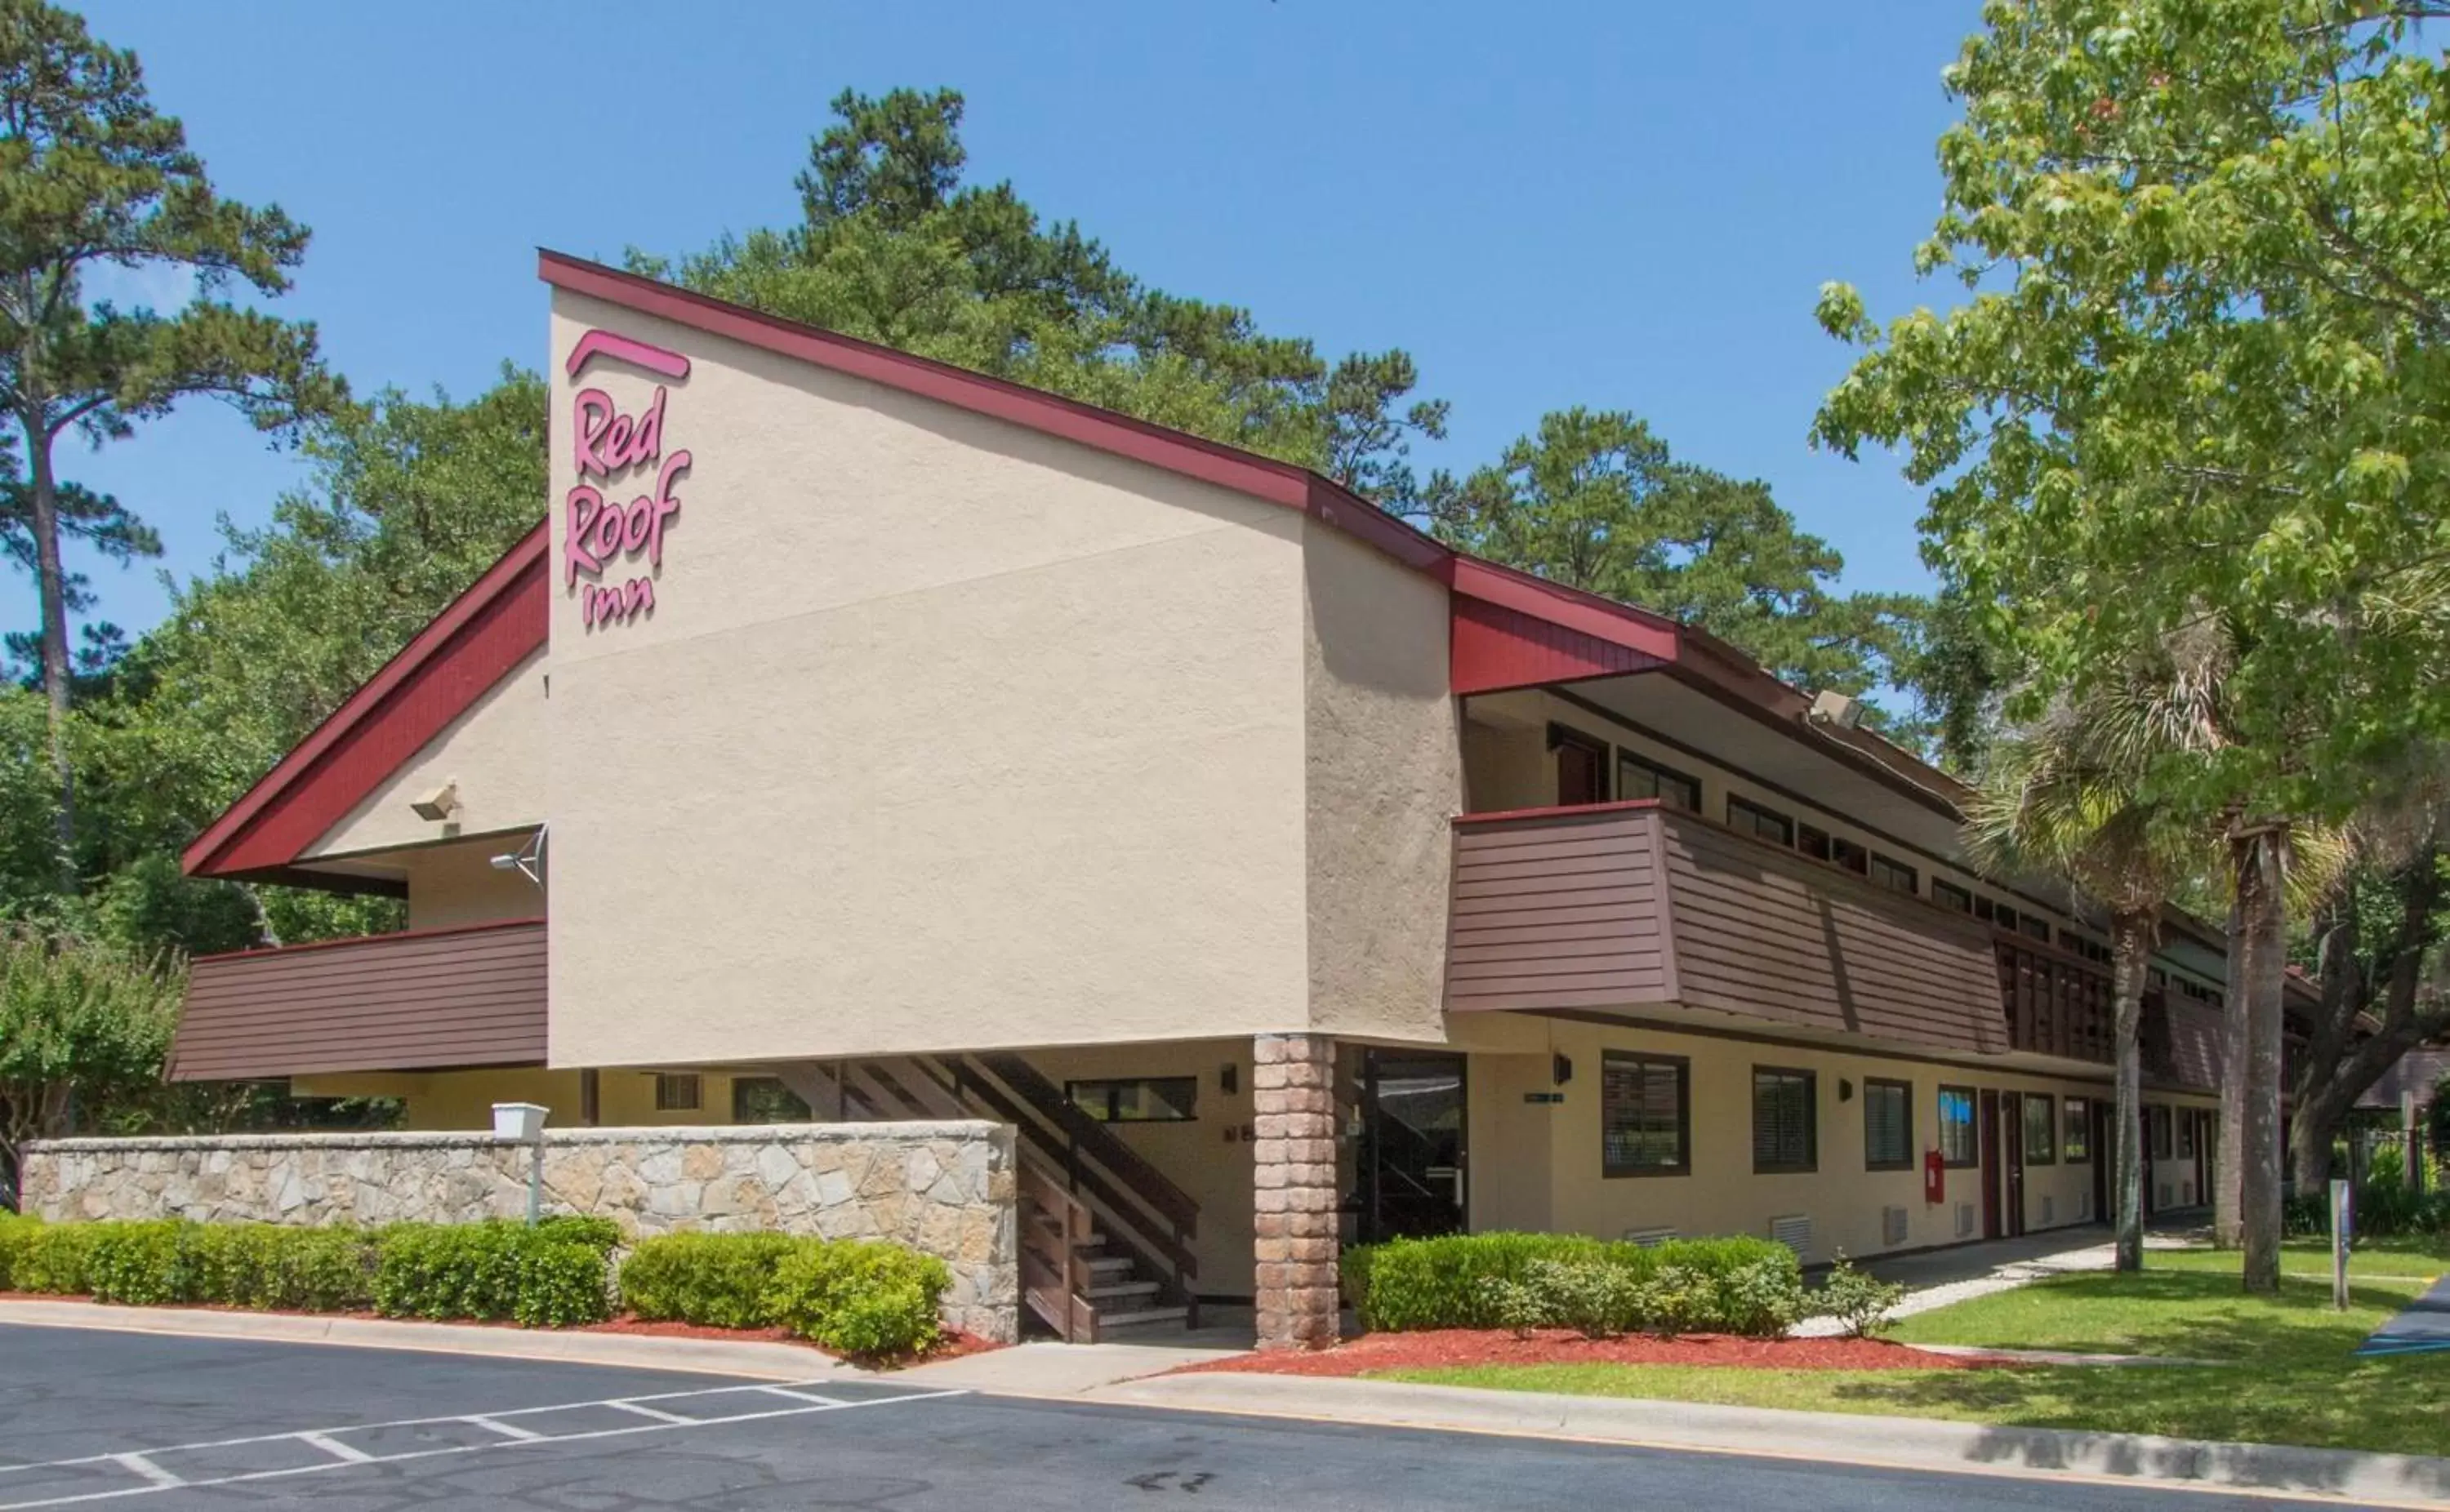 Property Building in Red Roof Inn Hilton Head Island